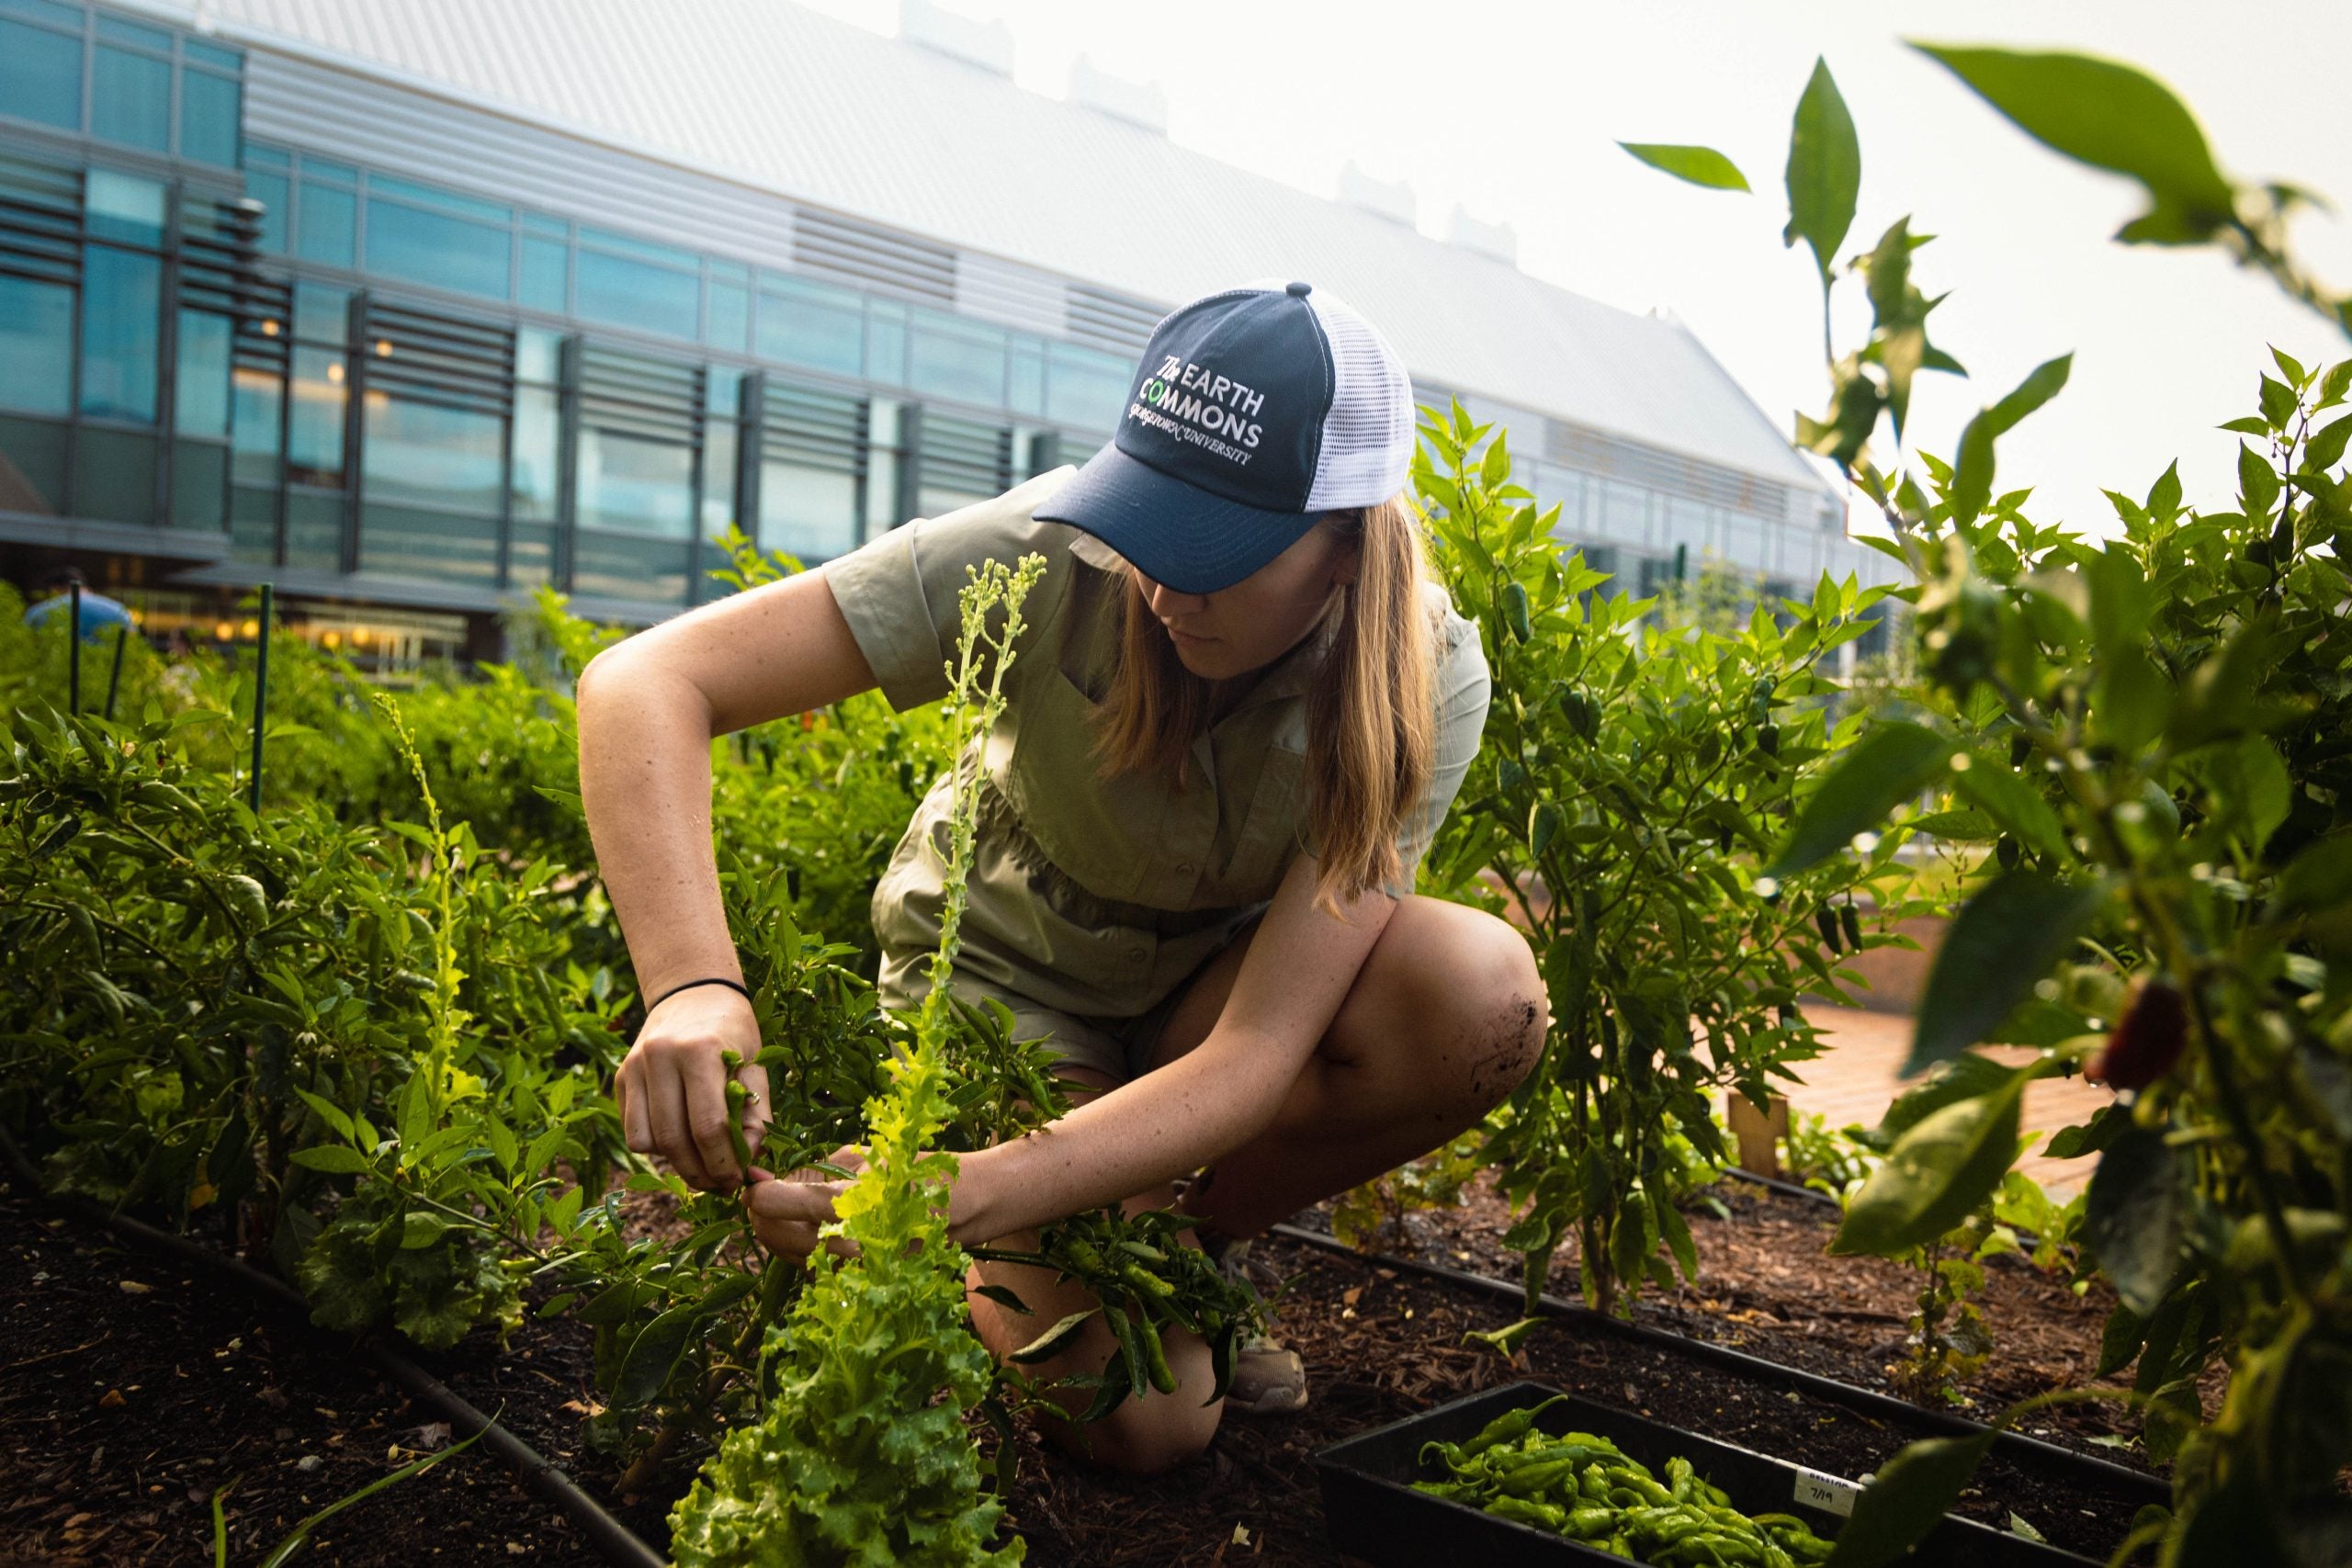 A young woman hunches over a basil plant in the middle of a garden on Georgetown's campus. She wears a blue baseball cap and a T-shirt and shorts.